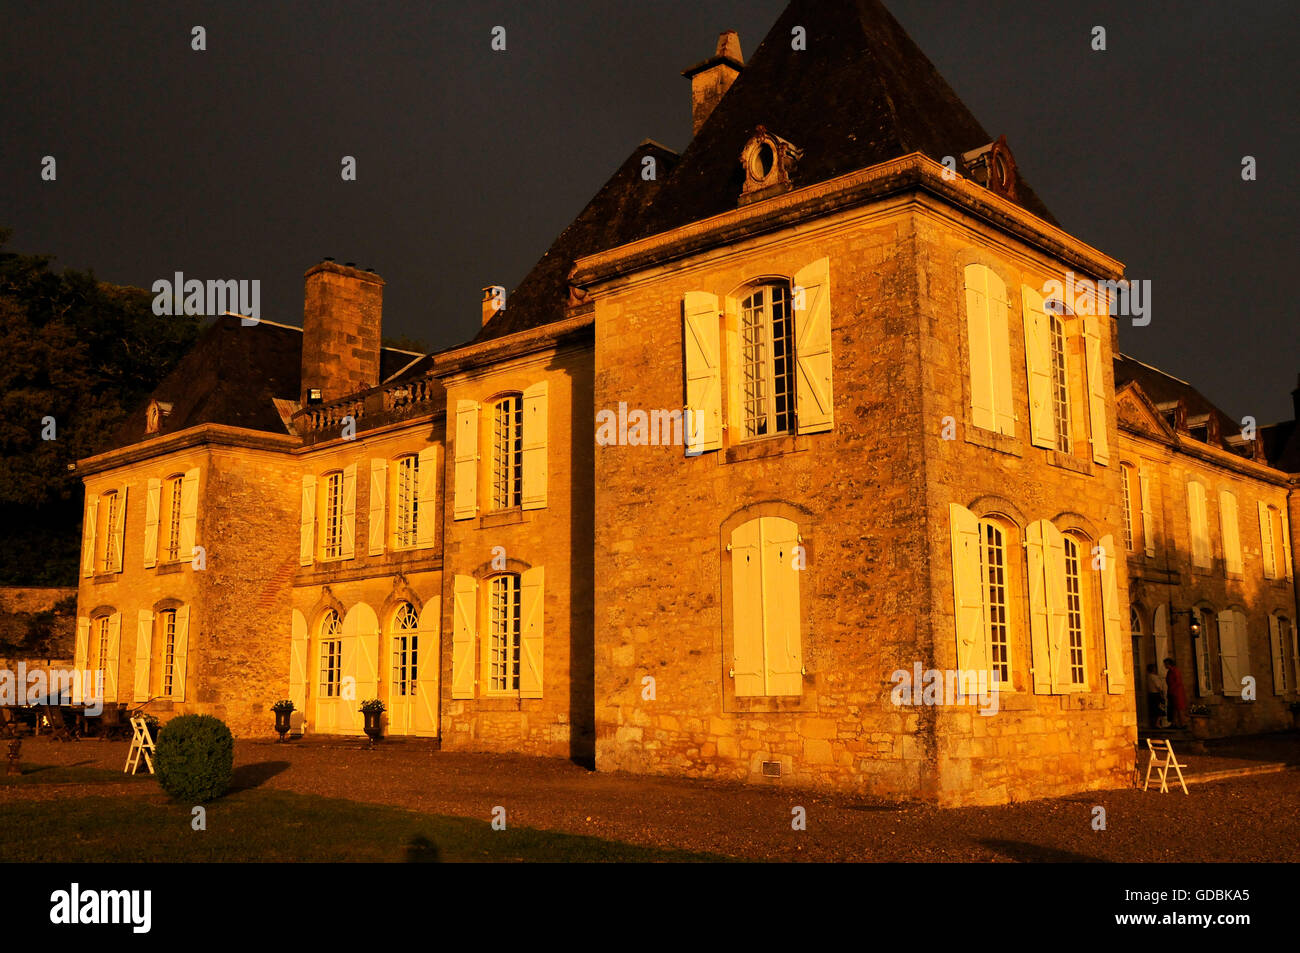 Chateau lit up at night Banque D'Images